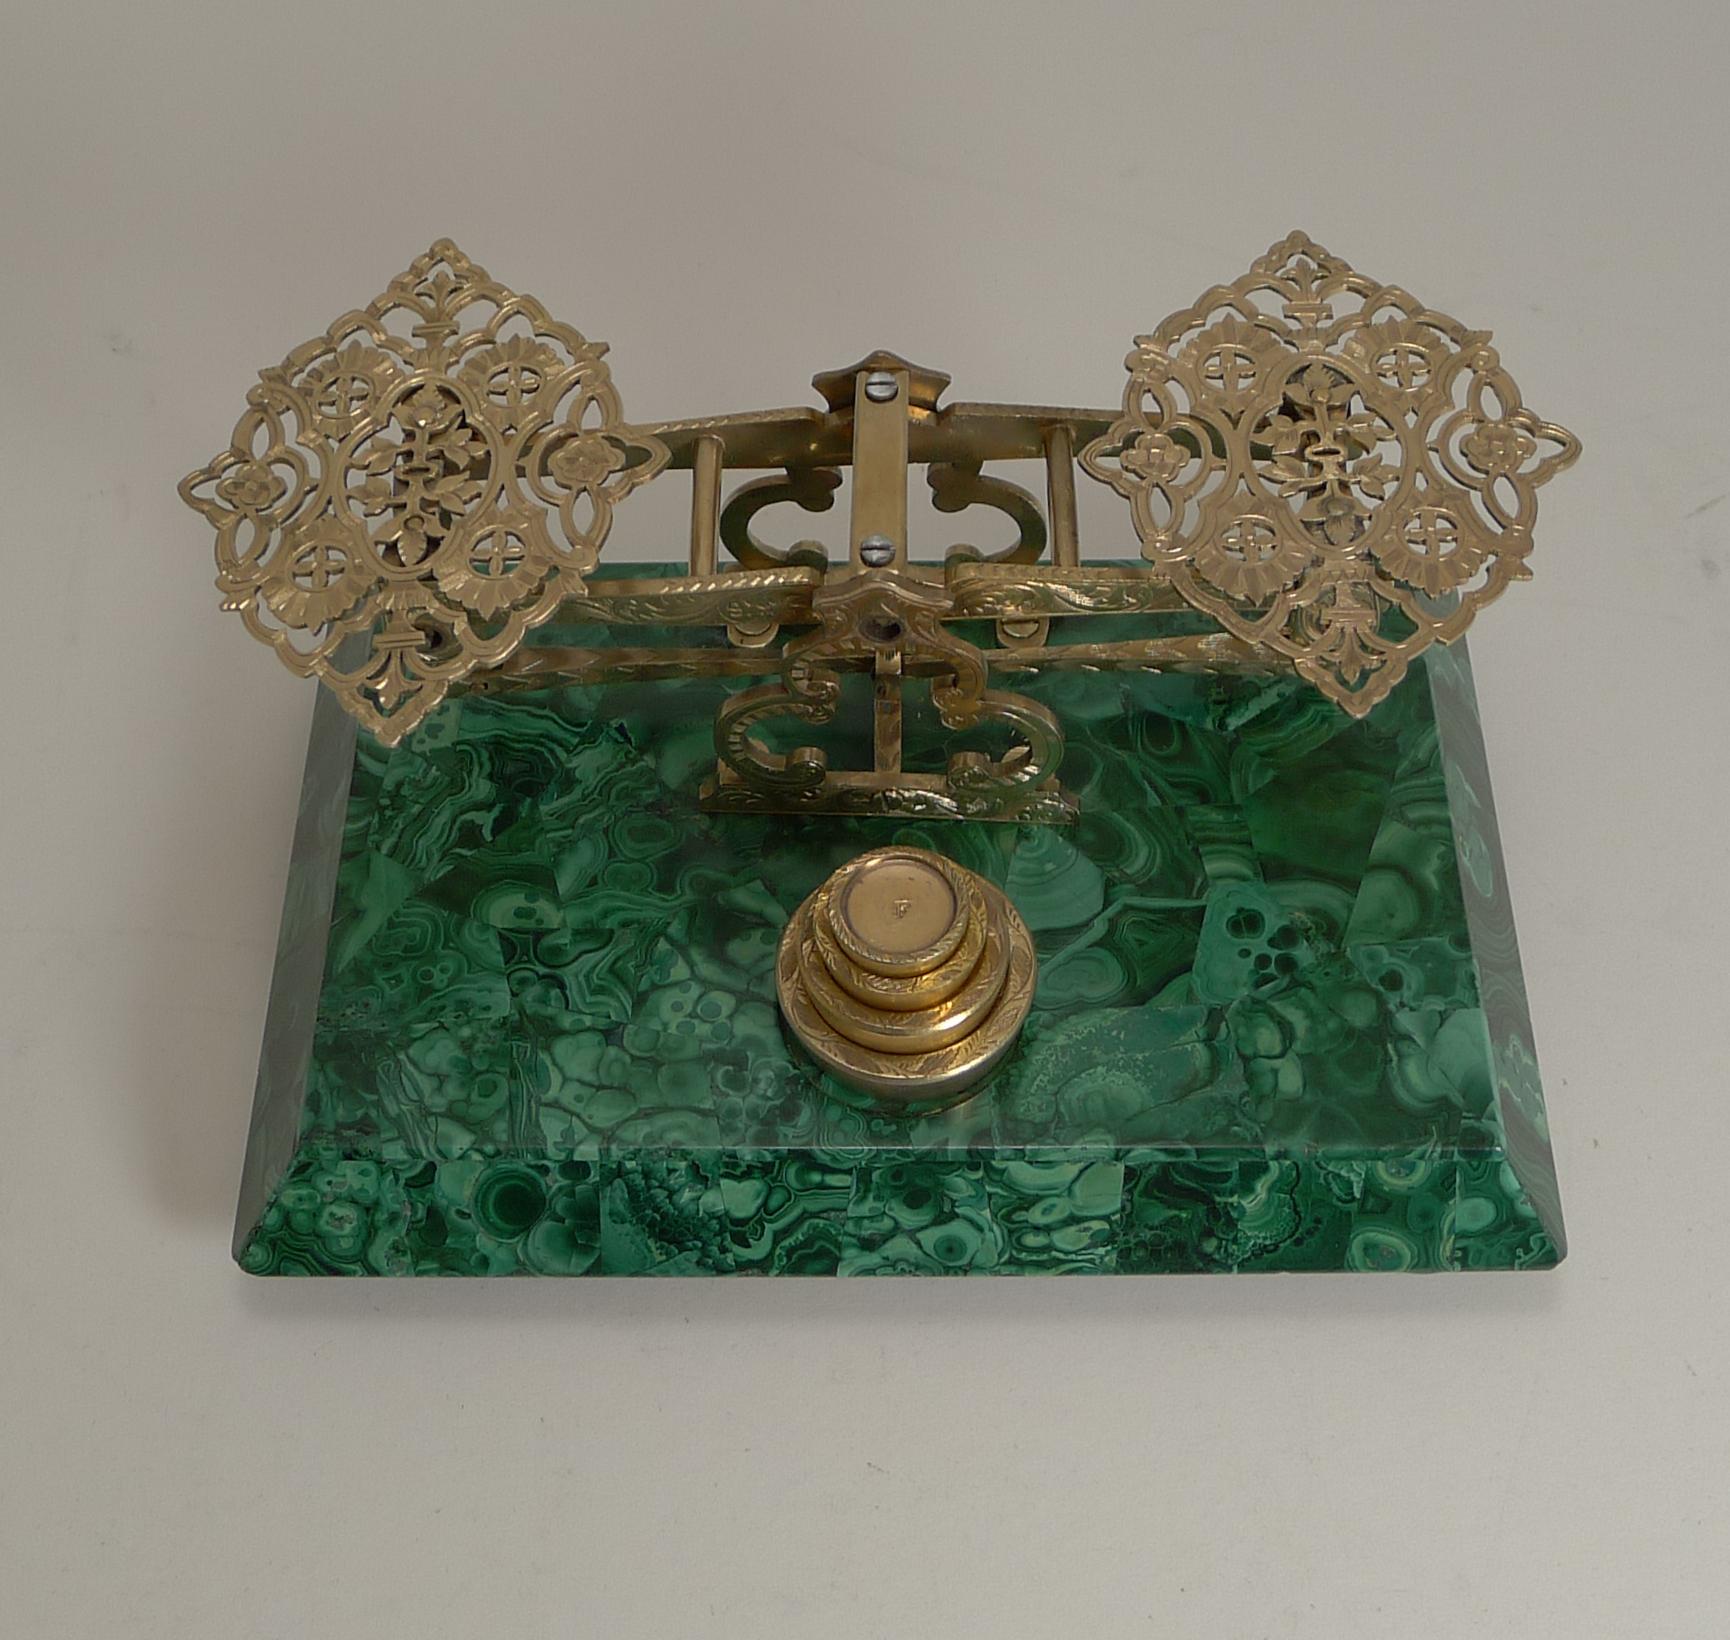 A very fine and rare antique English desk or letter scale, the base covered in stunning green Malachite.

The gilded brass or bronze fittings are all hand engraved and the two pans beautifully pierced or reticulated, top quality and quite